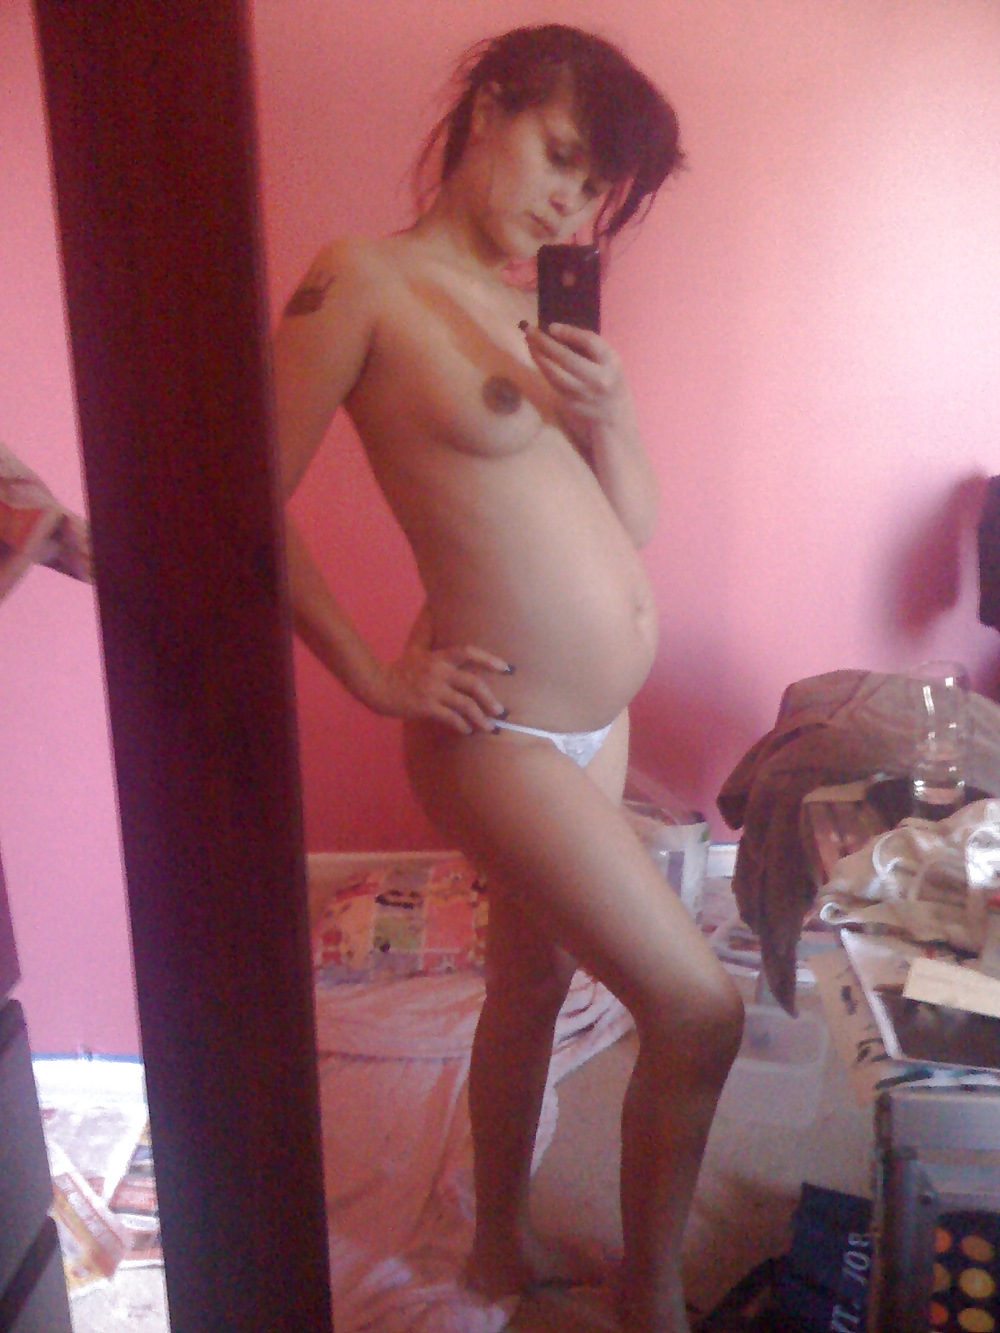 My collection 60 : pregnant teen #24463303